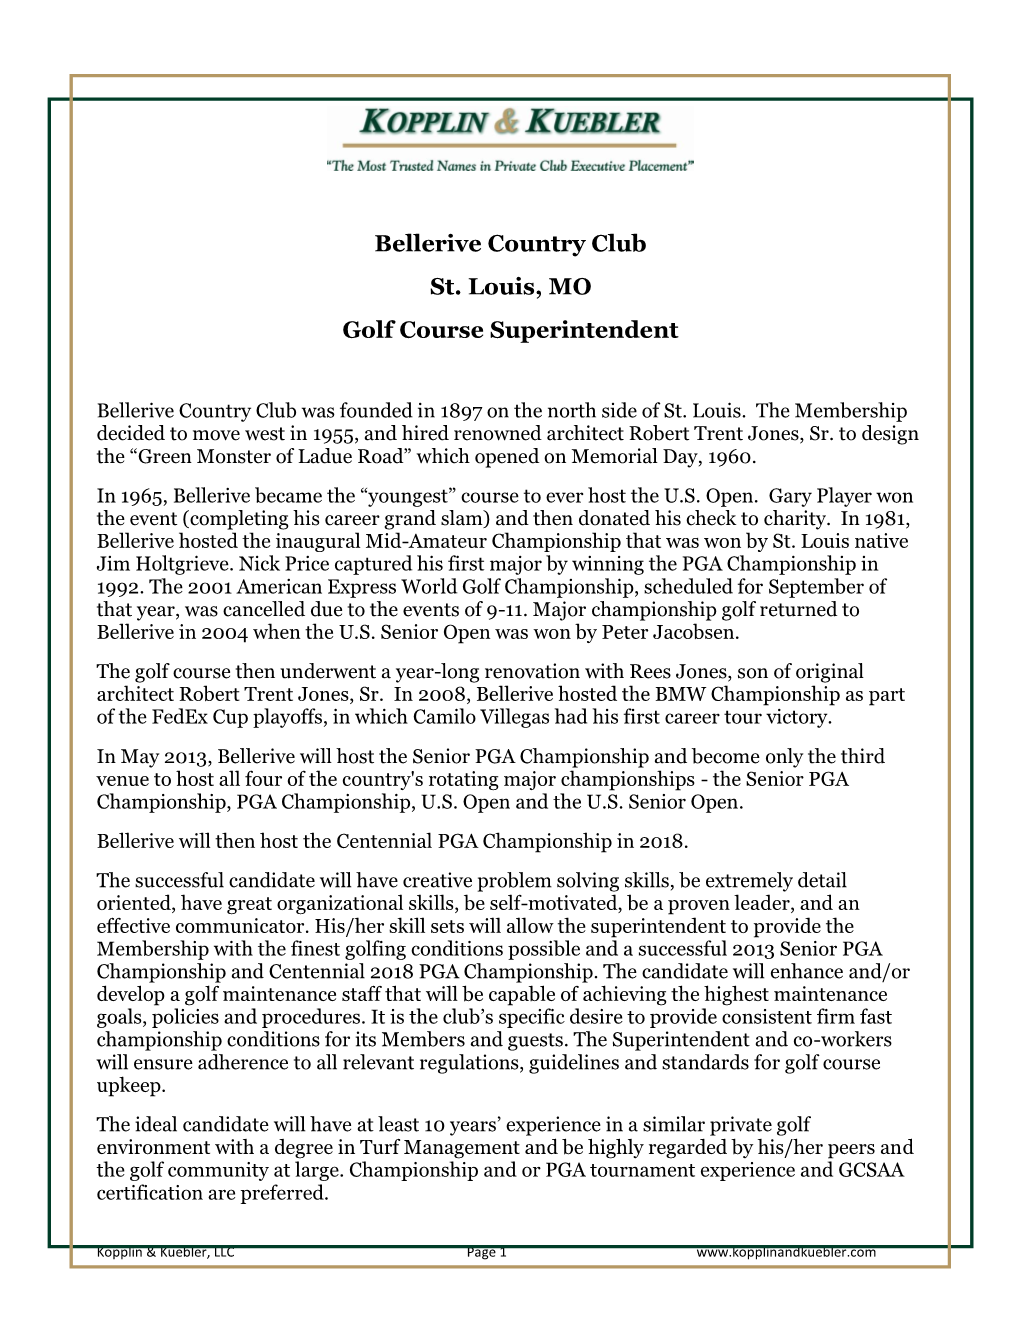 Bellerive Country Club St. Louis, MO Golf Course Superintendent